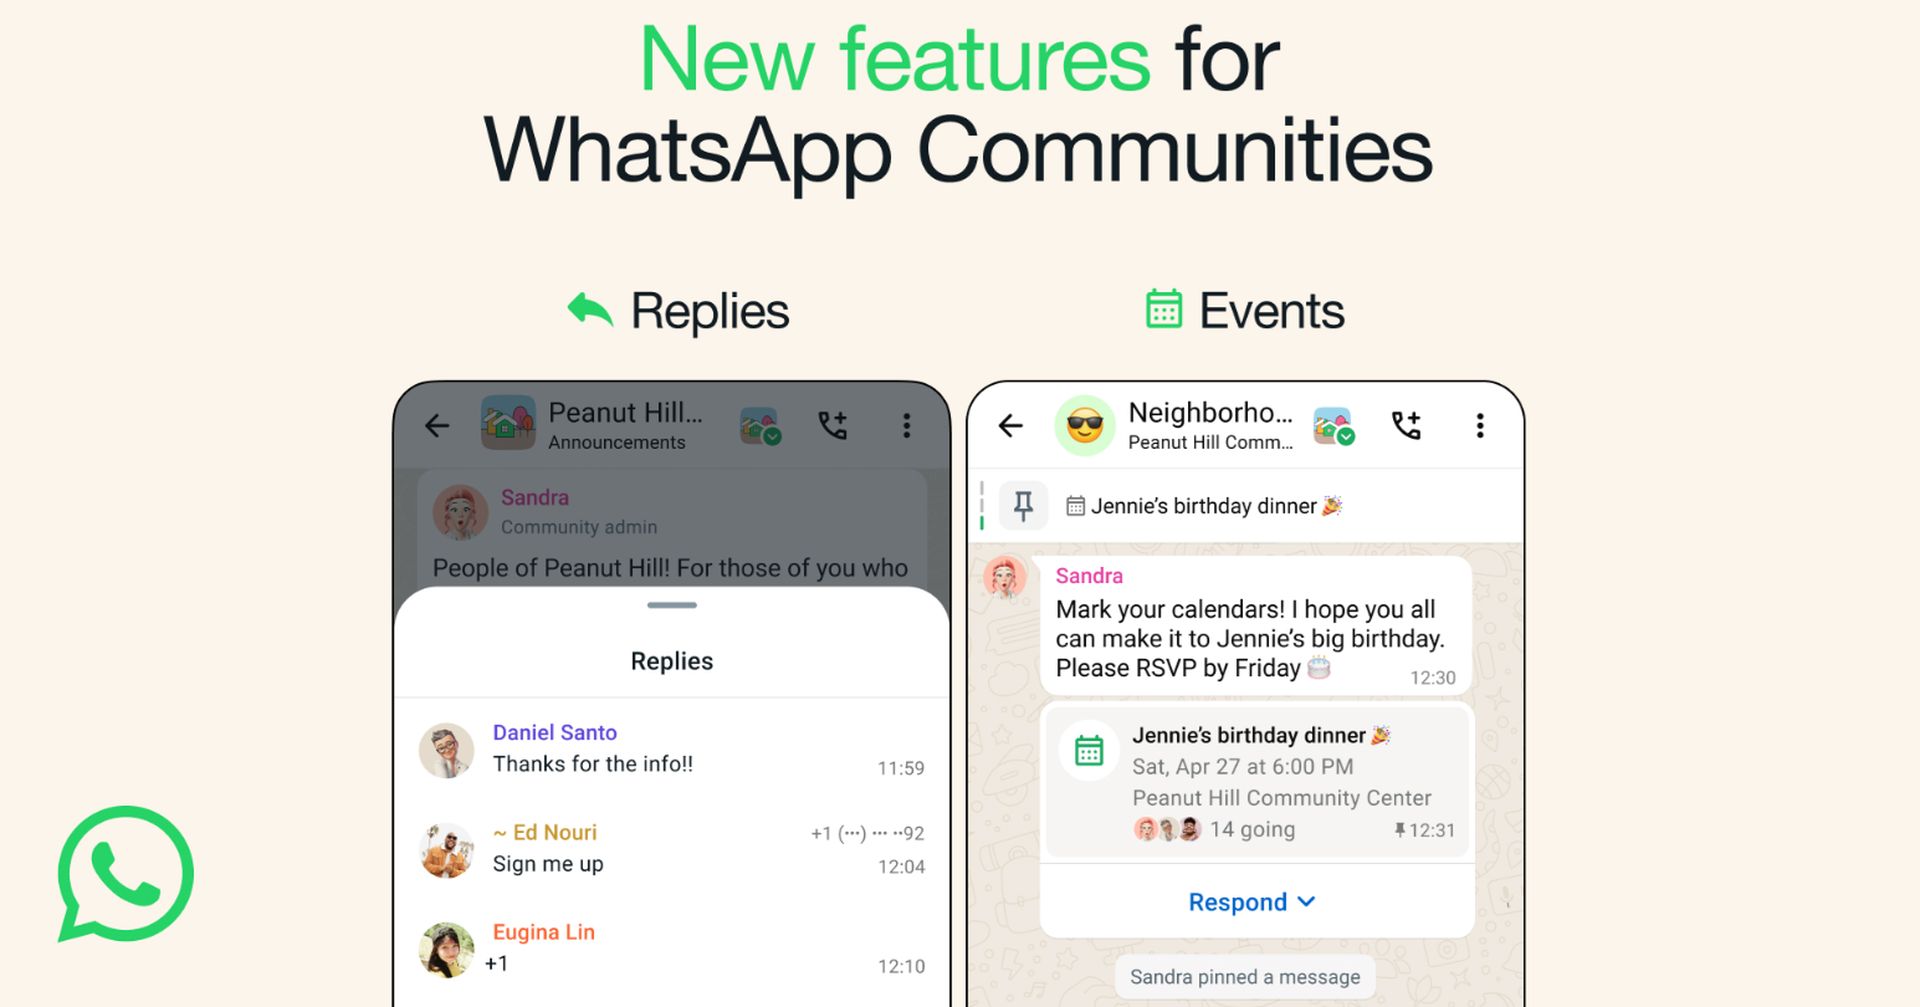 WhatsApp Communities can now be used to plan events